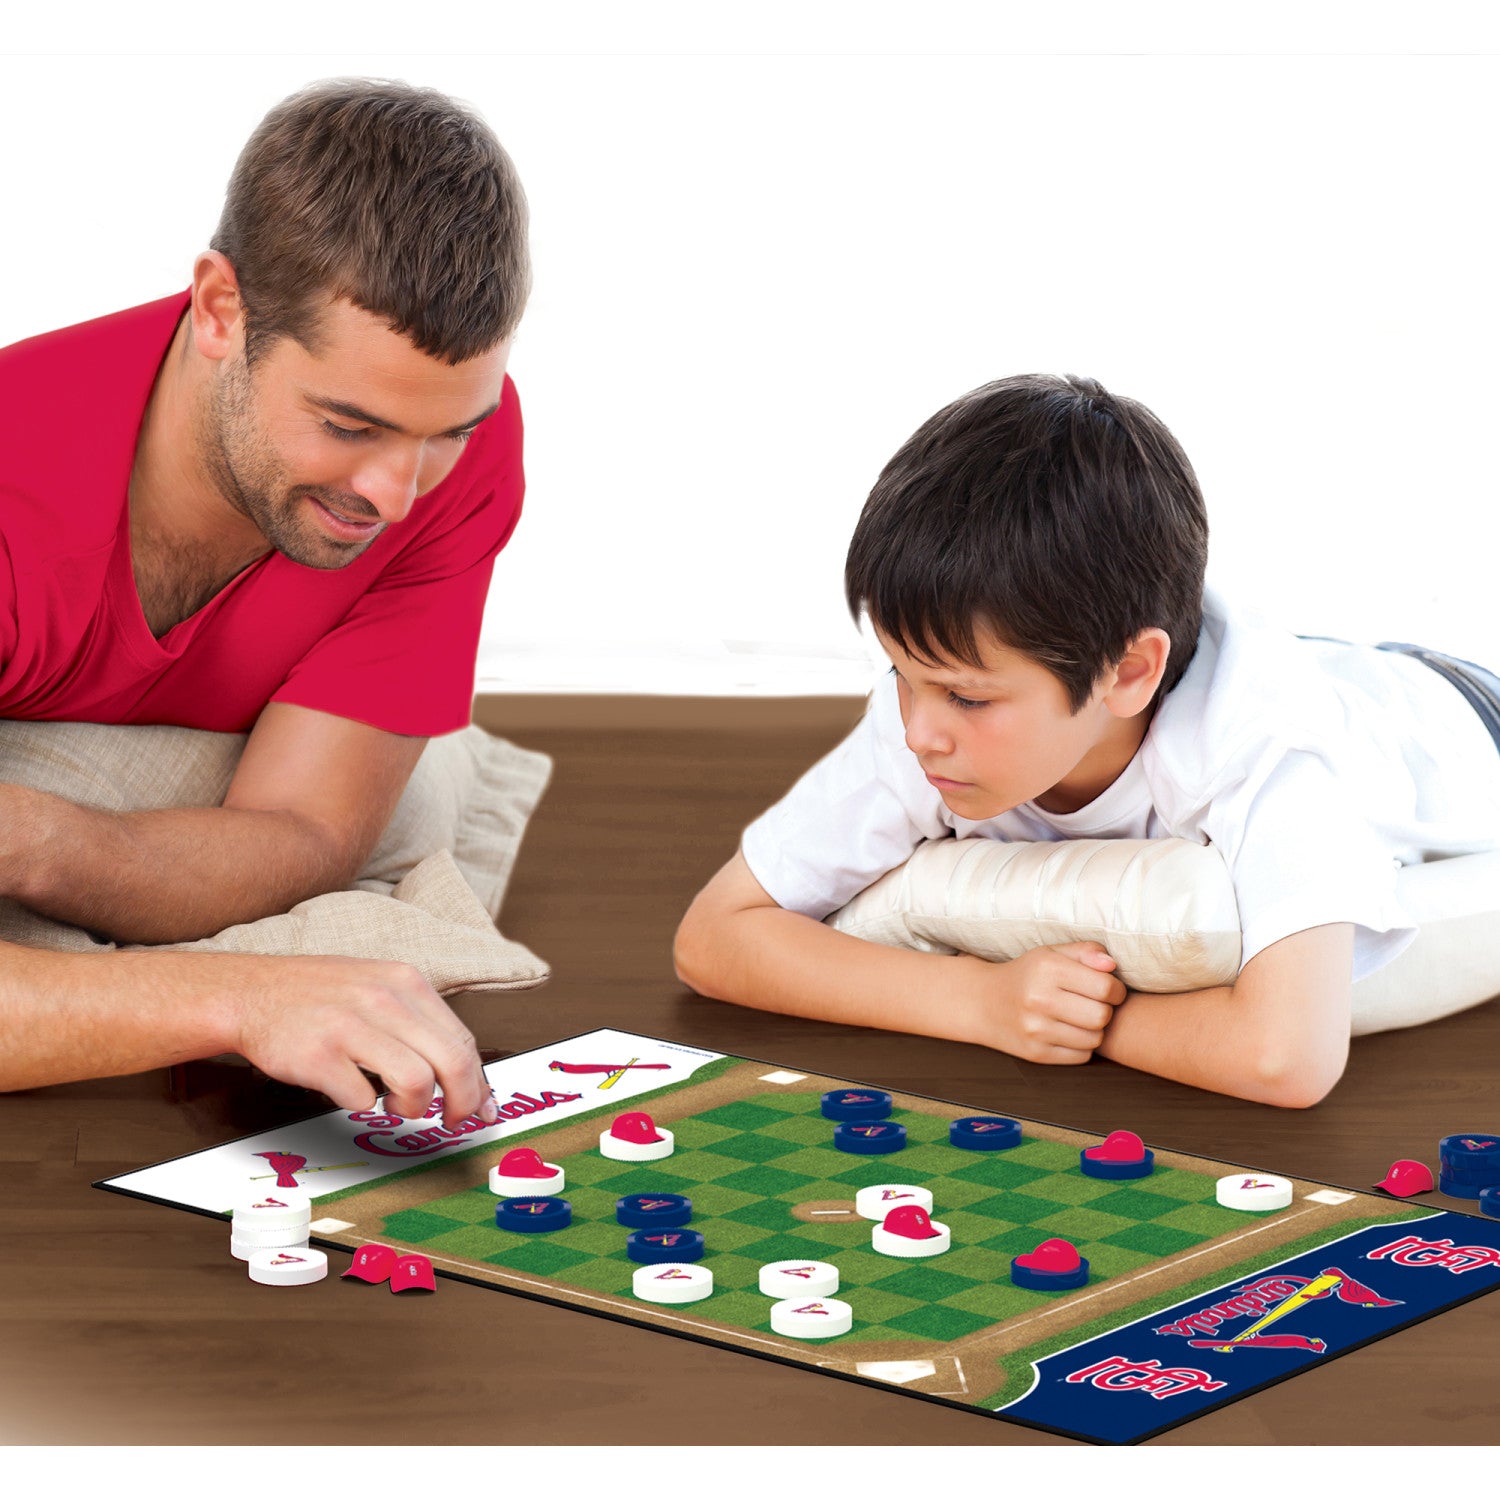 STL CARDINALS CHECKERS BOARD GAME OFFICIALLY LICENSED MLB Complete